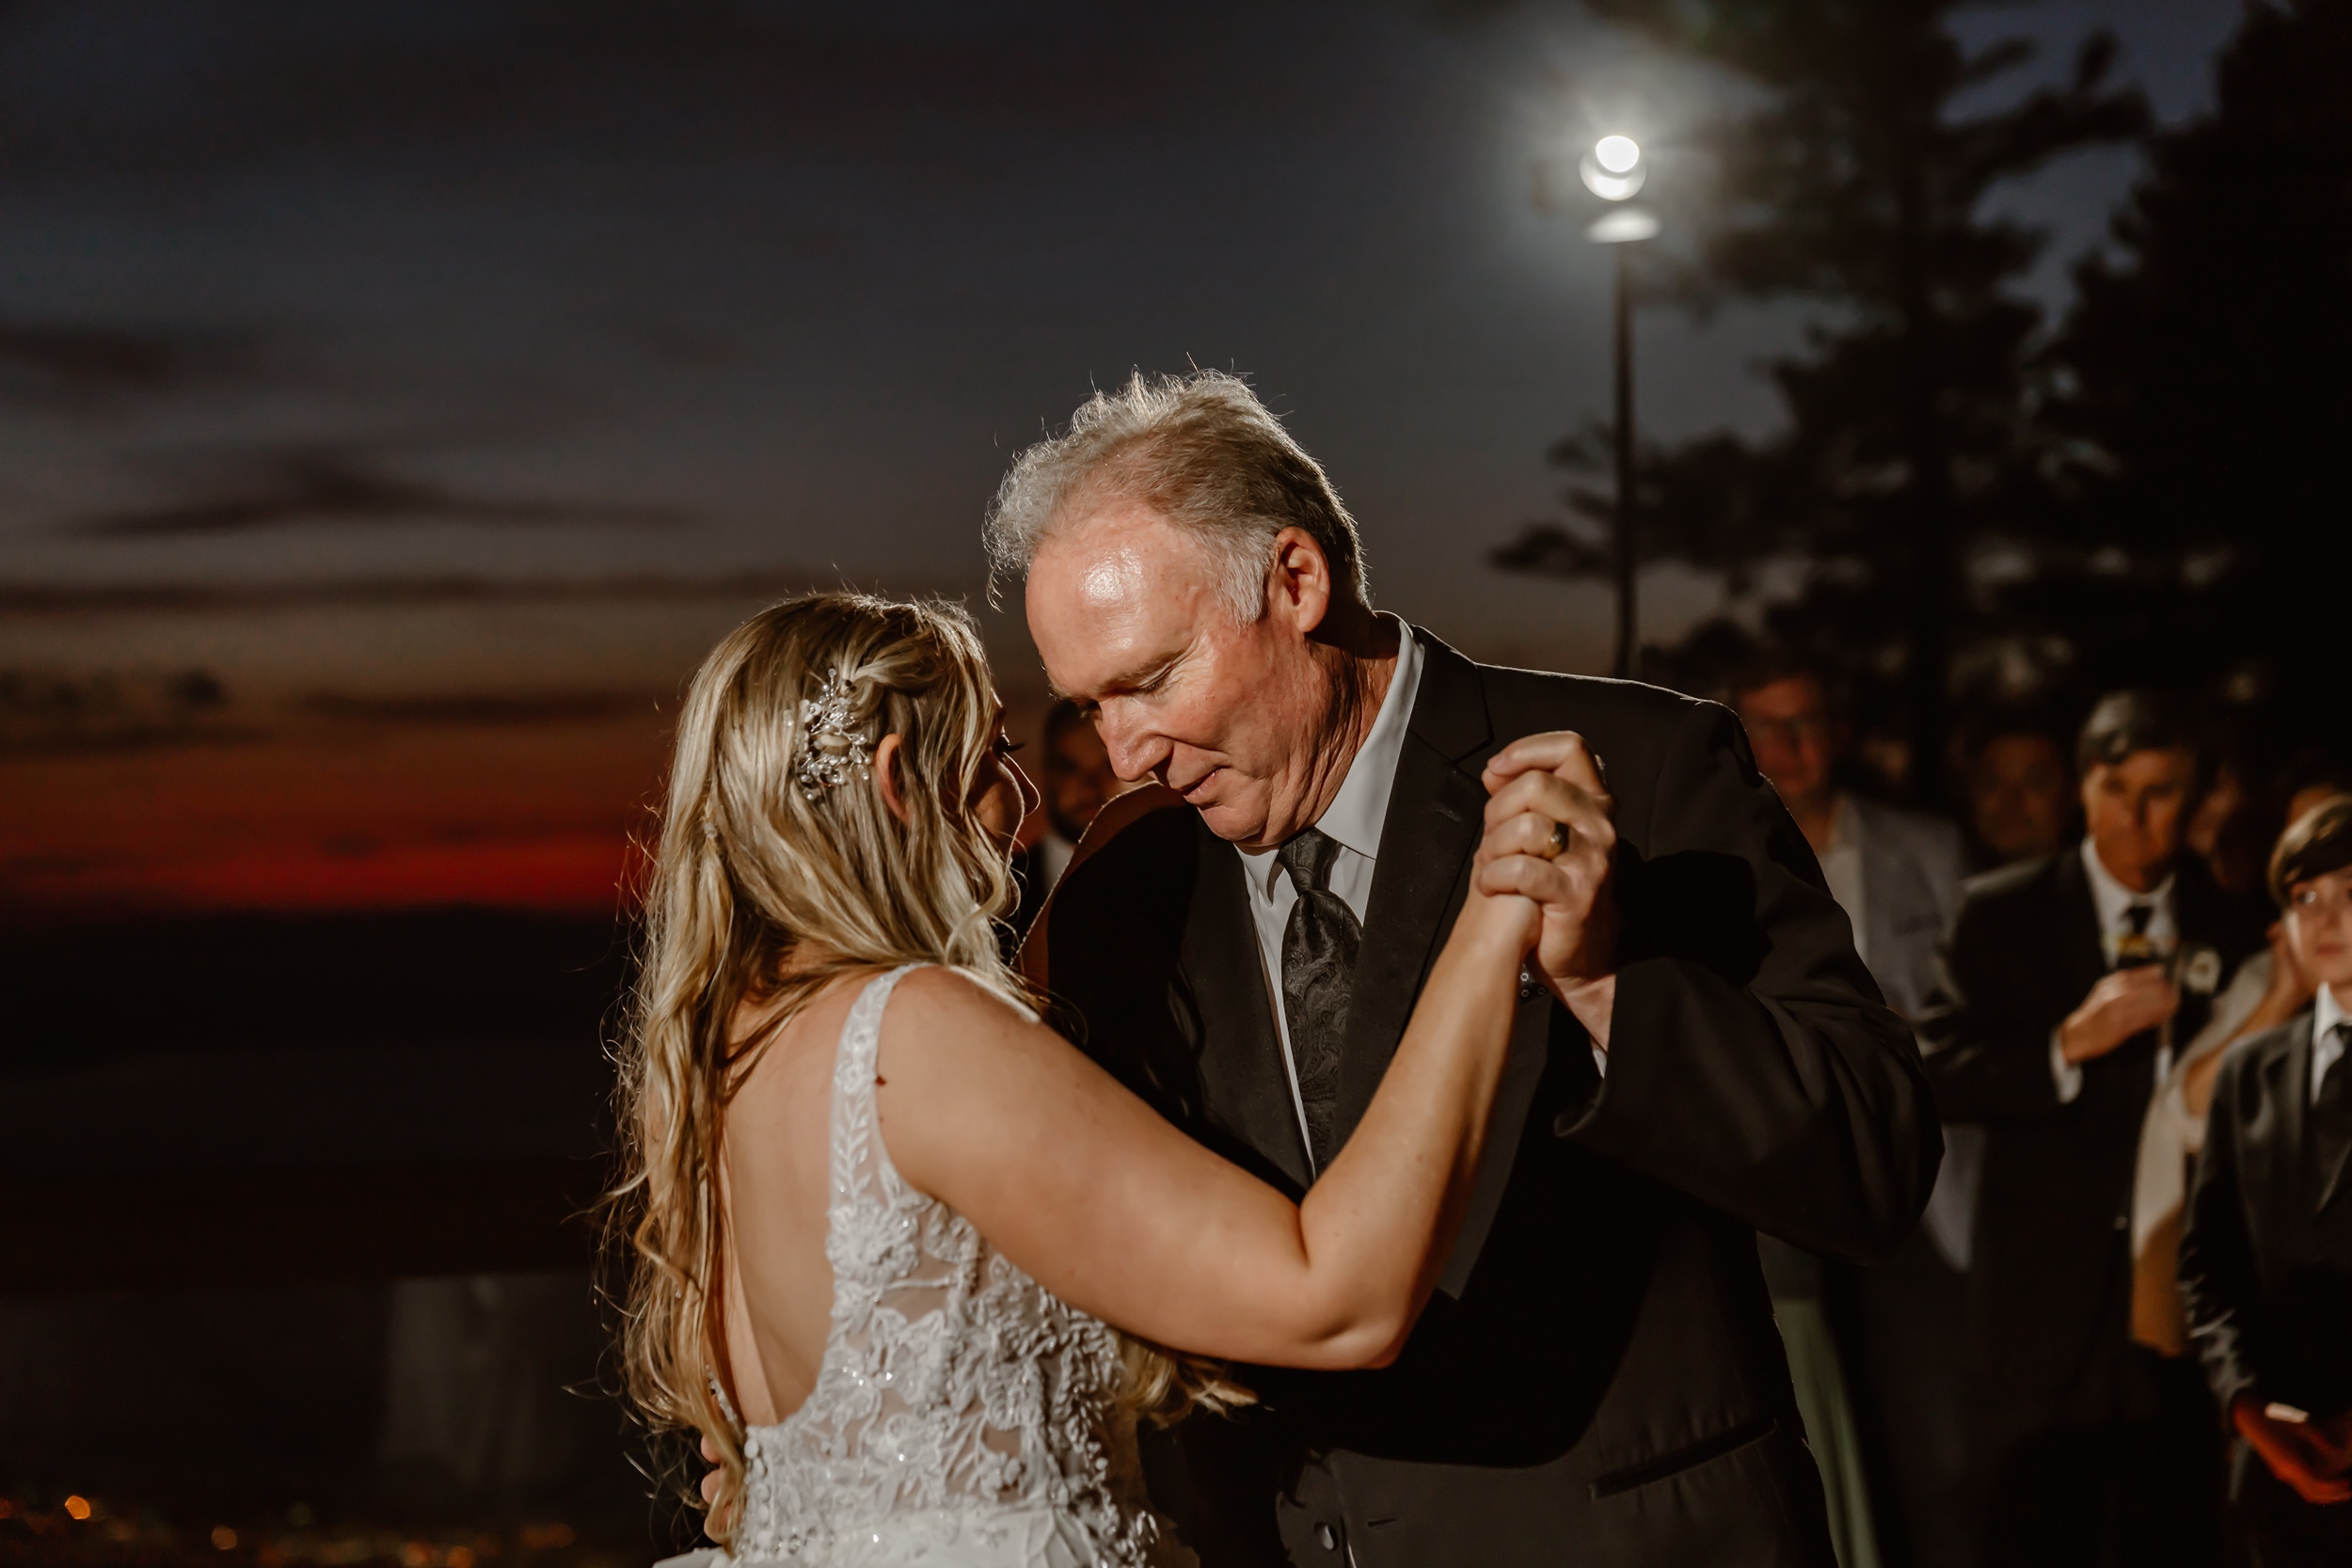 Father daughter dance at Heavenly wedding